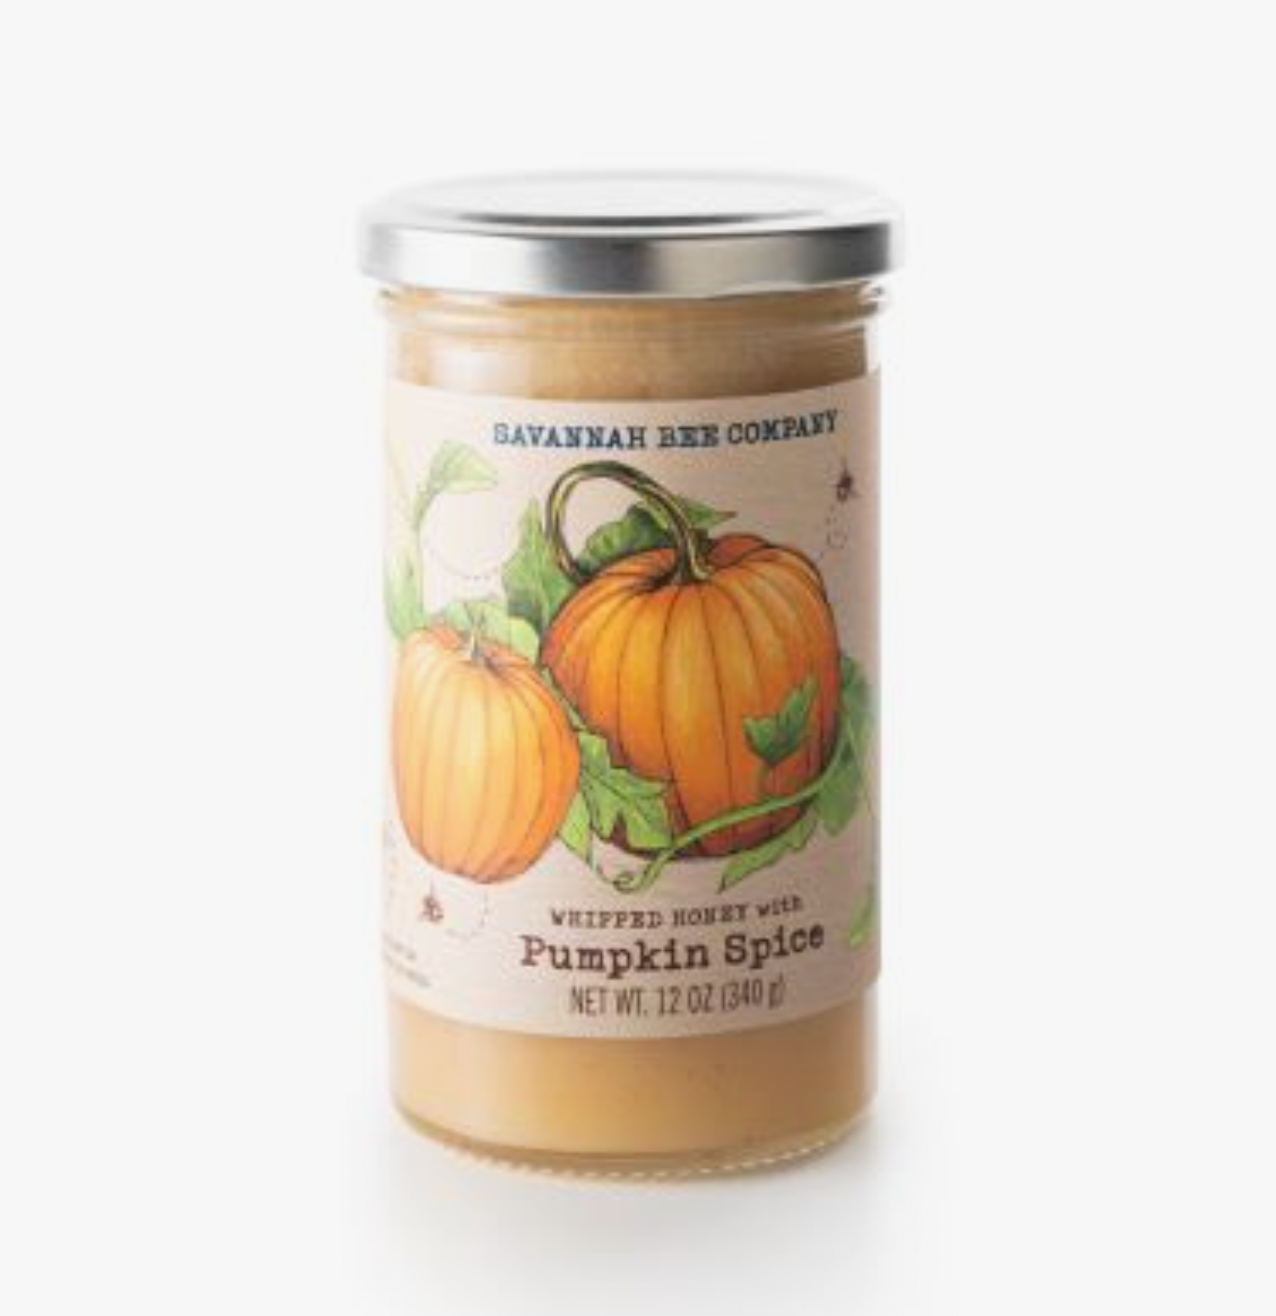 Whipped Honey with Pumpkin Spice 12oz